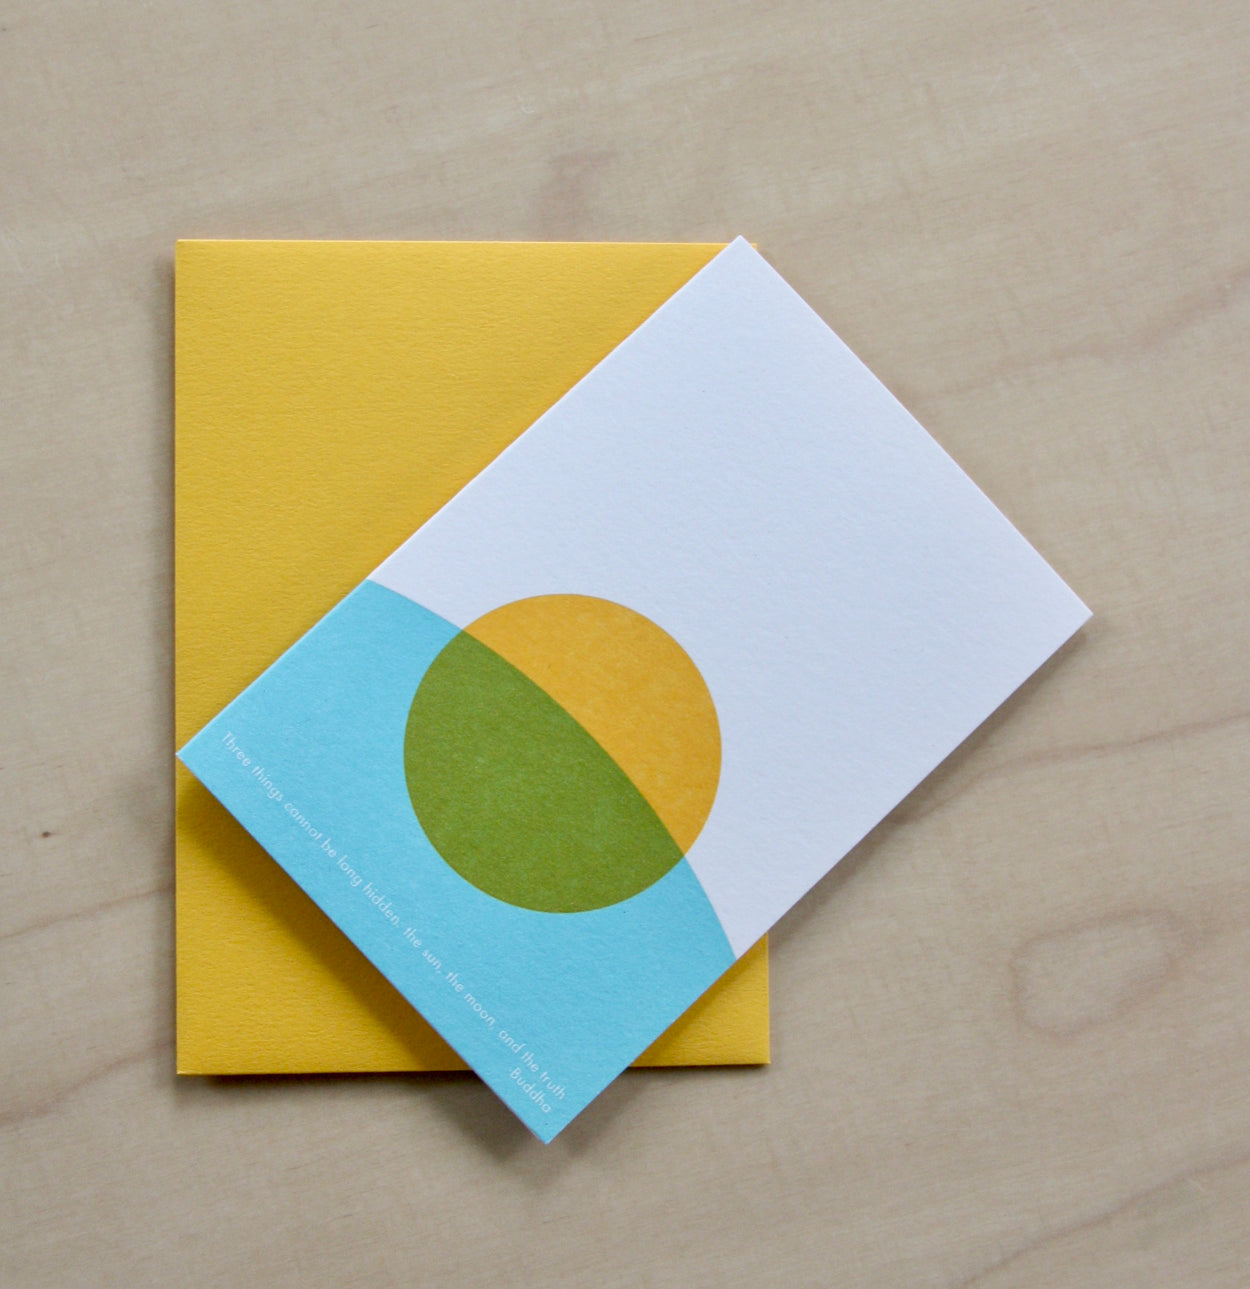 Hand printed greeting card with yellow sun and blue curve on a yellow envelope. reading "Three things cannot be long hidden, the sun, the moon and the truth" Buddha